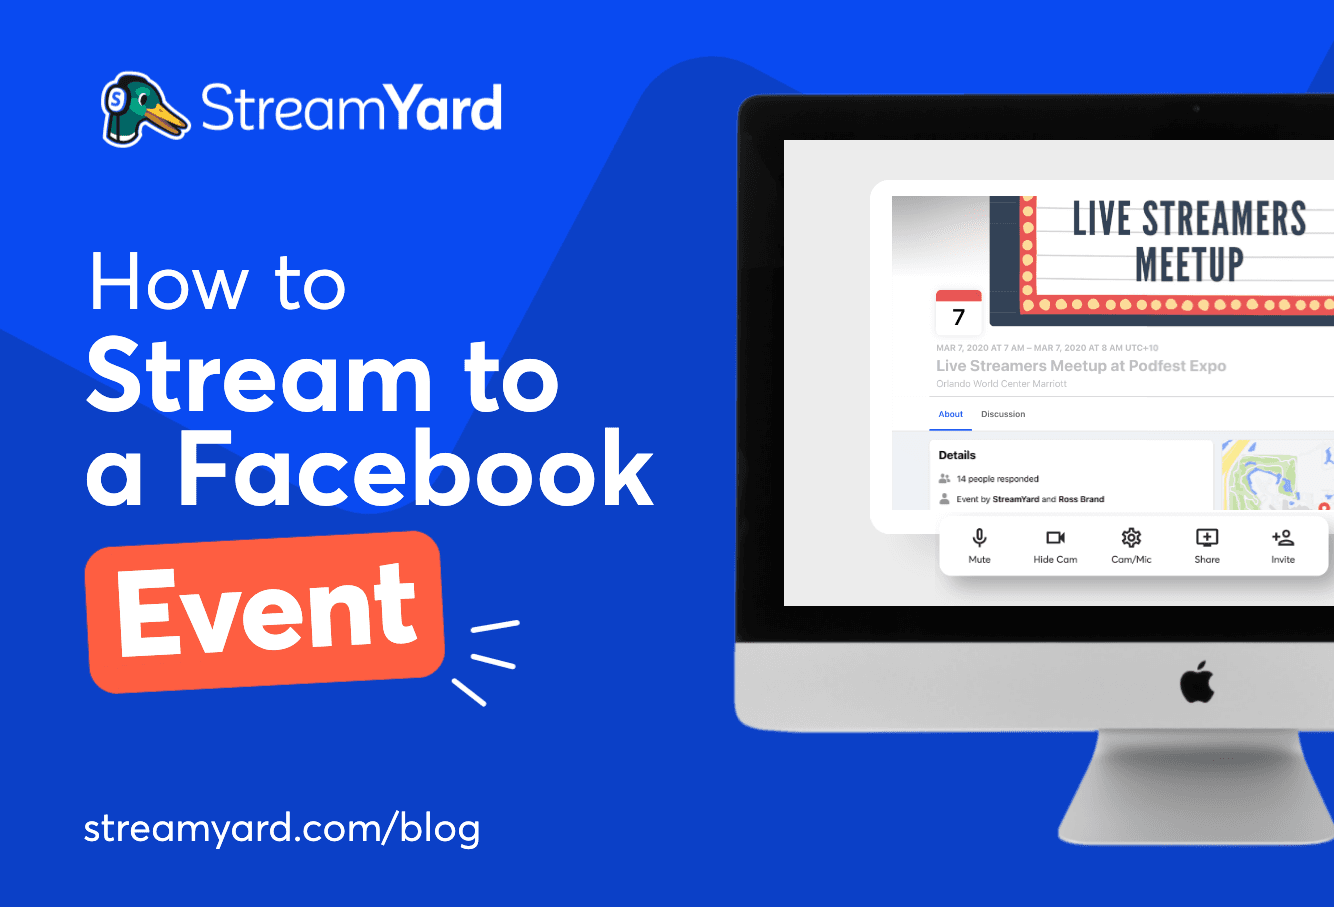 Learn how to stream to a Facebook Event on your next live stream with this step-by-step guide.